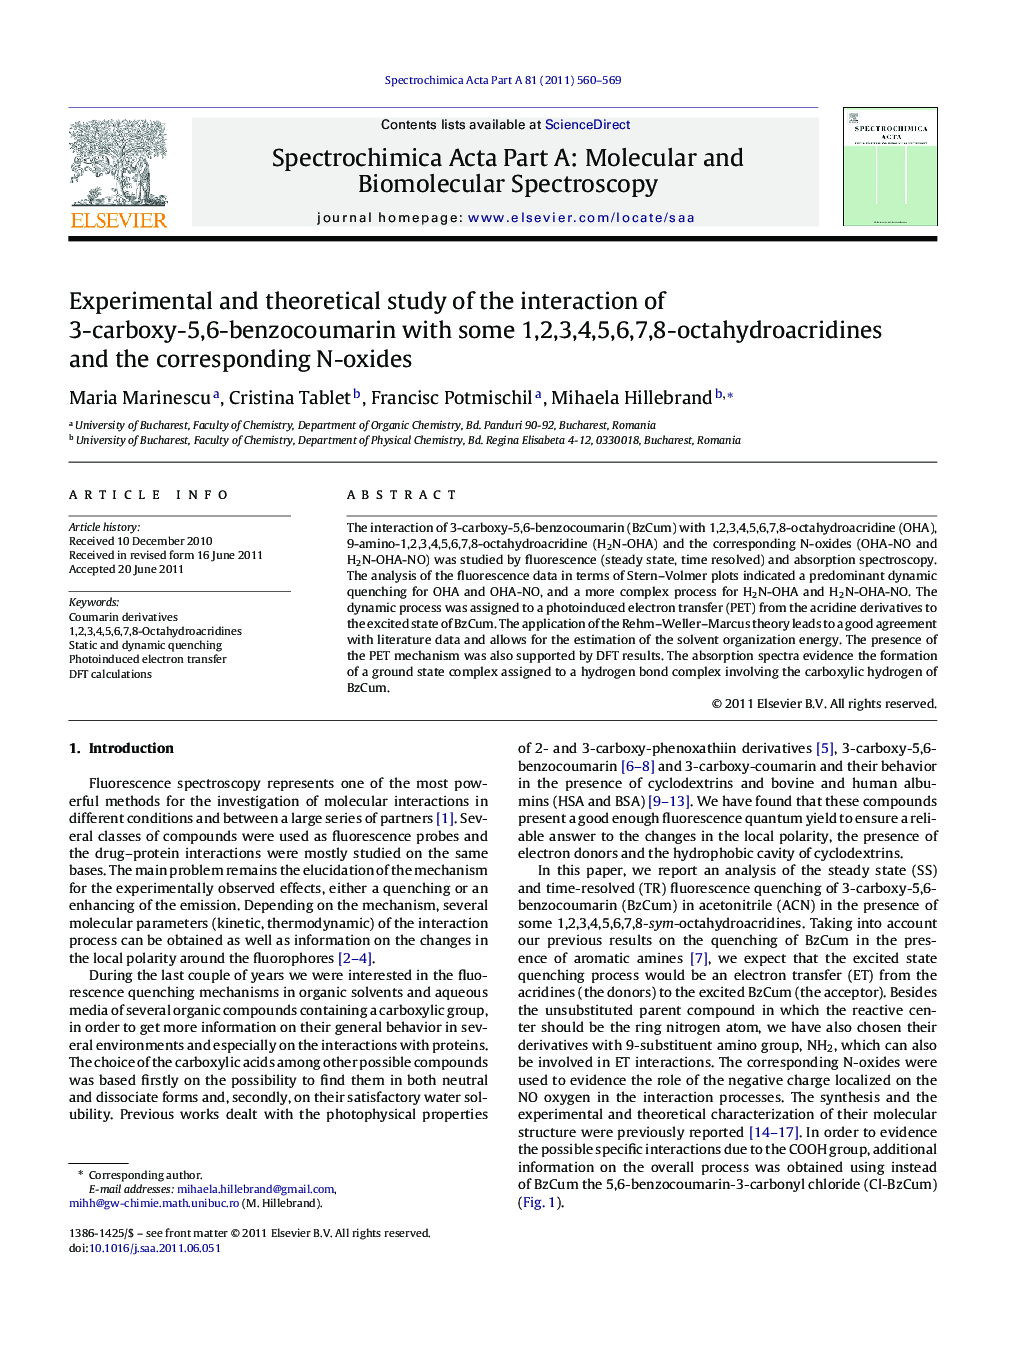 Experimental and theoretical study of the interaction of 3-carboxy-5,6-benzocoumarin with some 1,2,3,4,5,6,7,8-octahydroacridines and the corresponding N-oxides